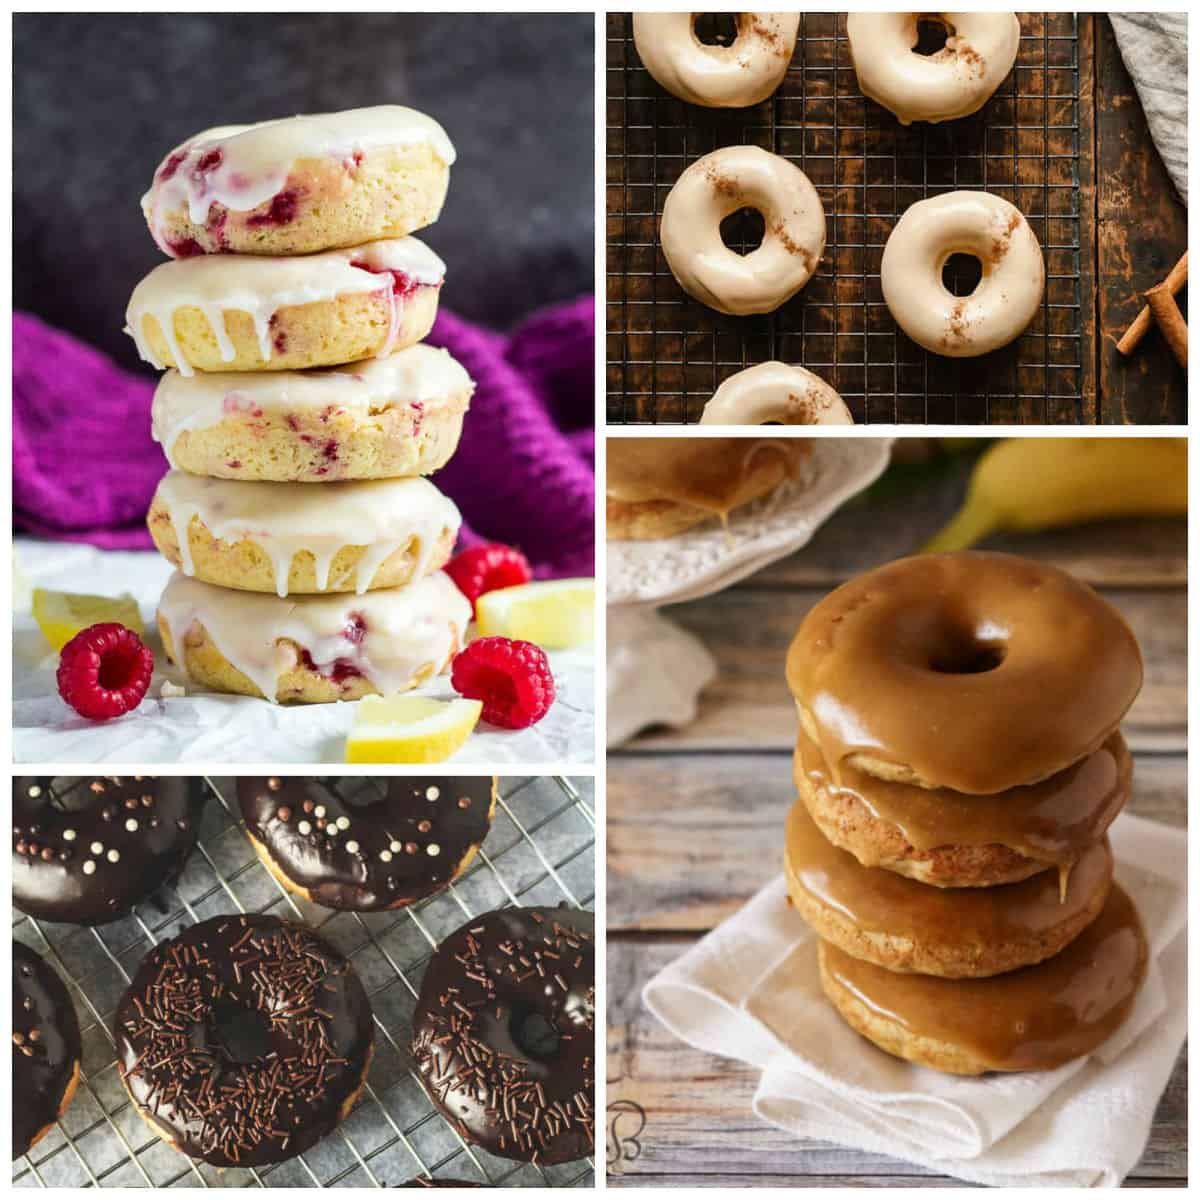 Several images of donuts, with chocolate, raspberries, glazes and toppings